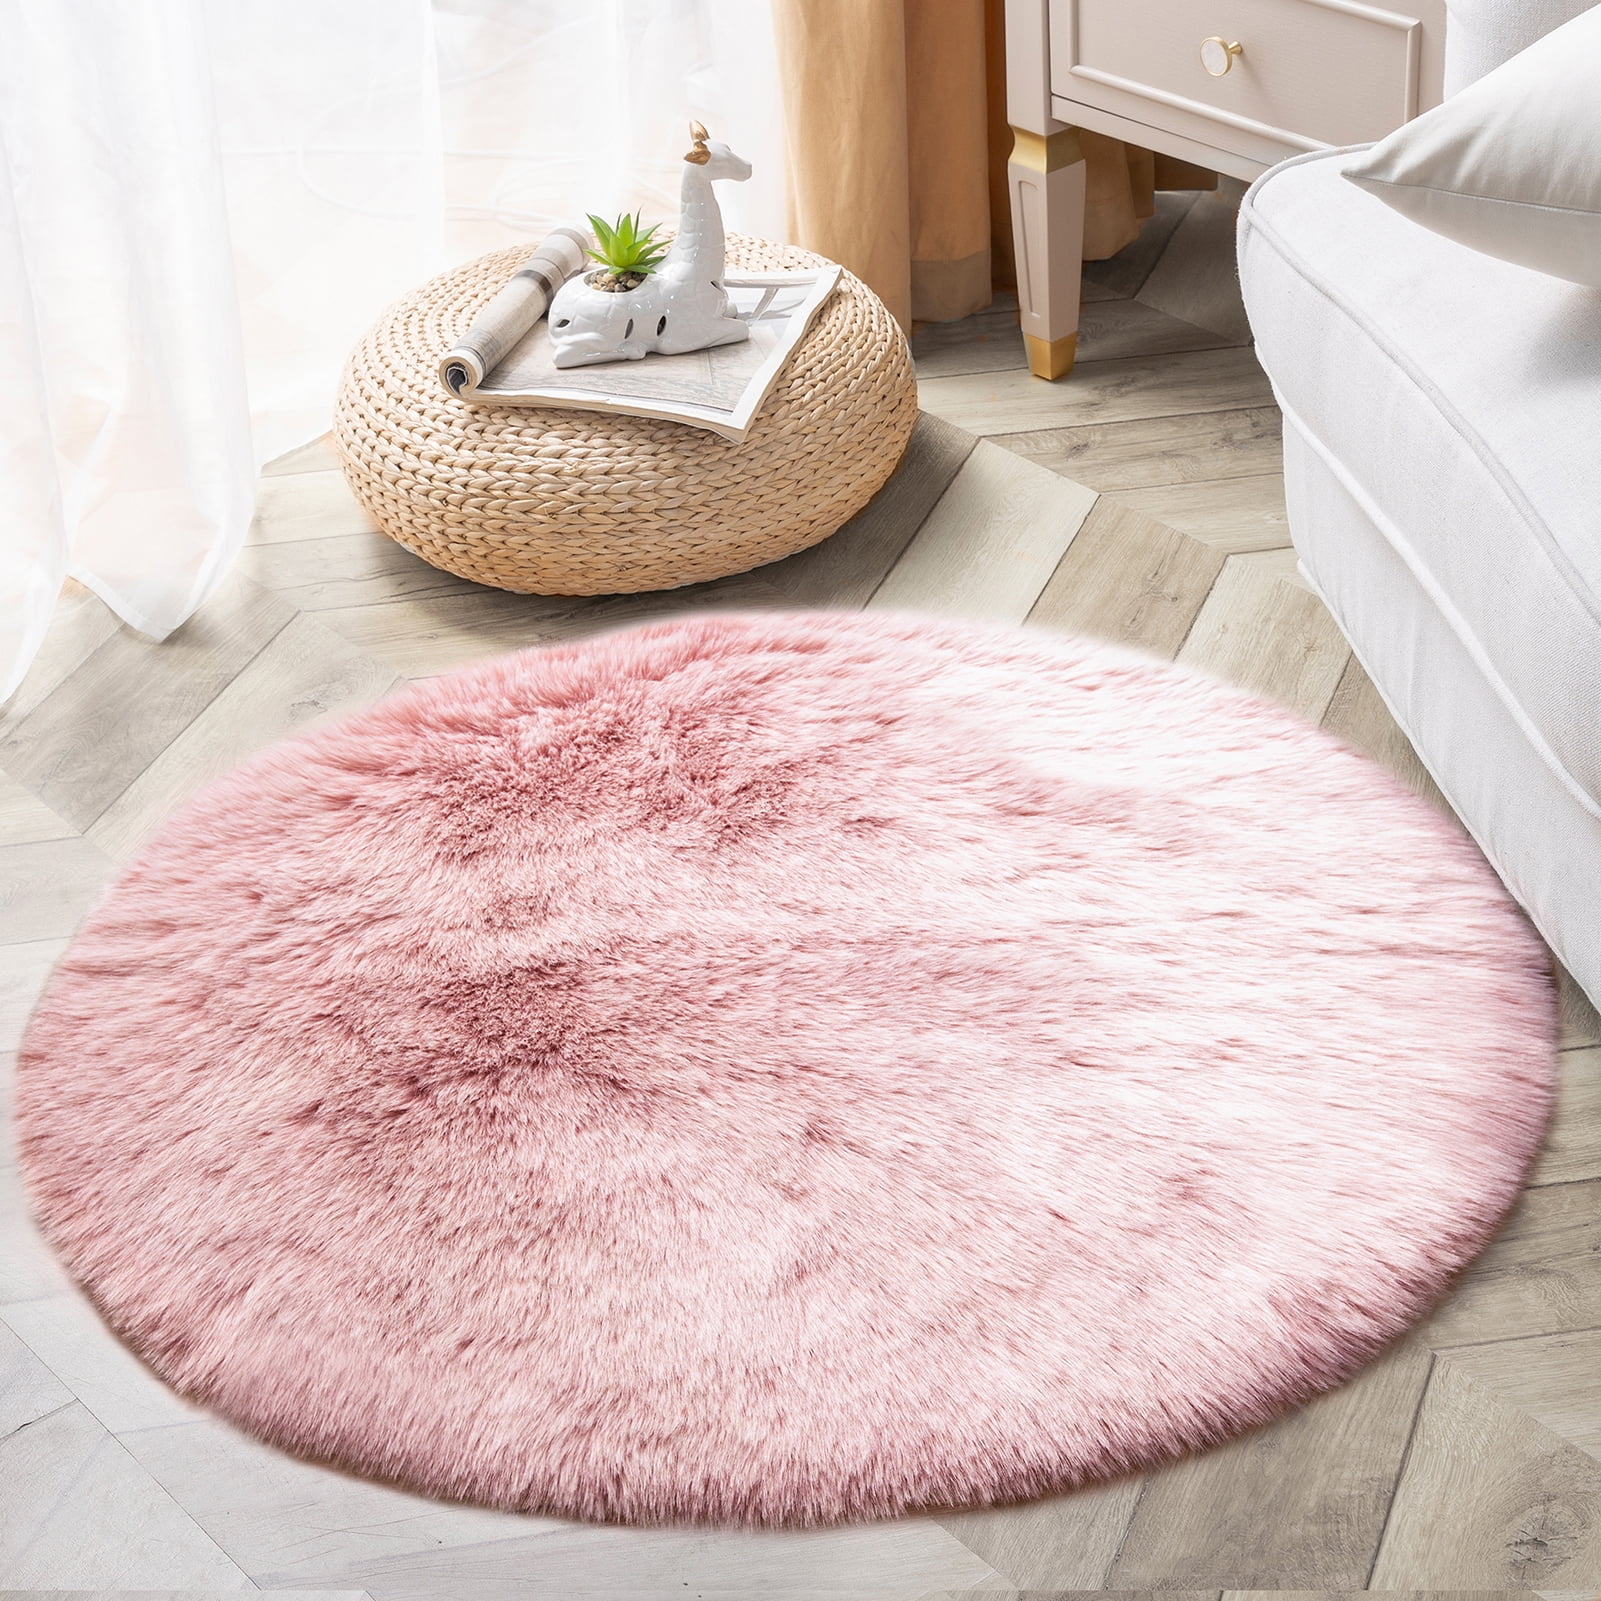 Phantoscope Deluxe Ultra Soft Faux Sheepskin Fur Series Fluffy Decorative Indoor Shag Area Rug, 2 x 3 Feet Rectangle, Pink and White, 1 Pack, Size: 2' x 3' Rec